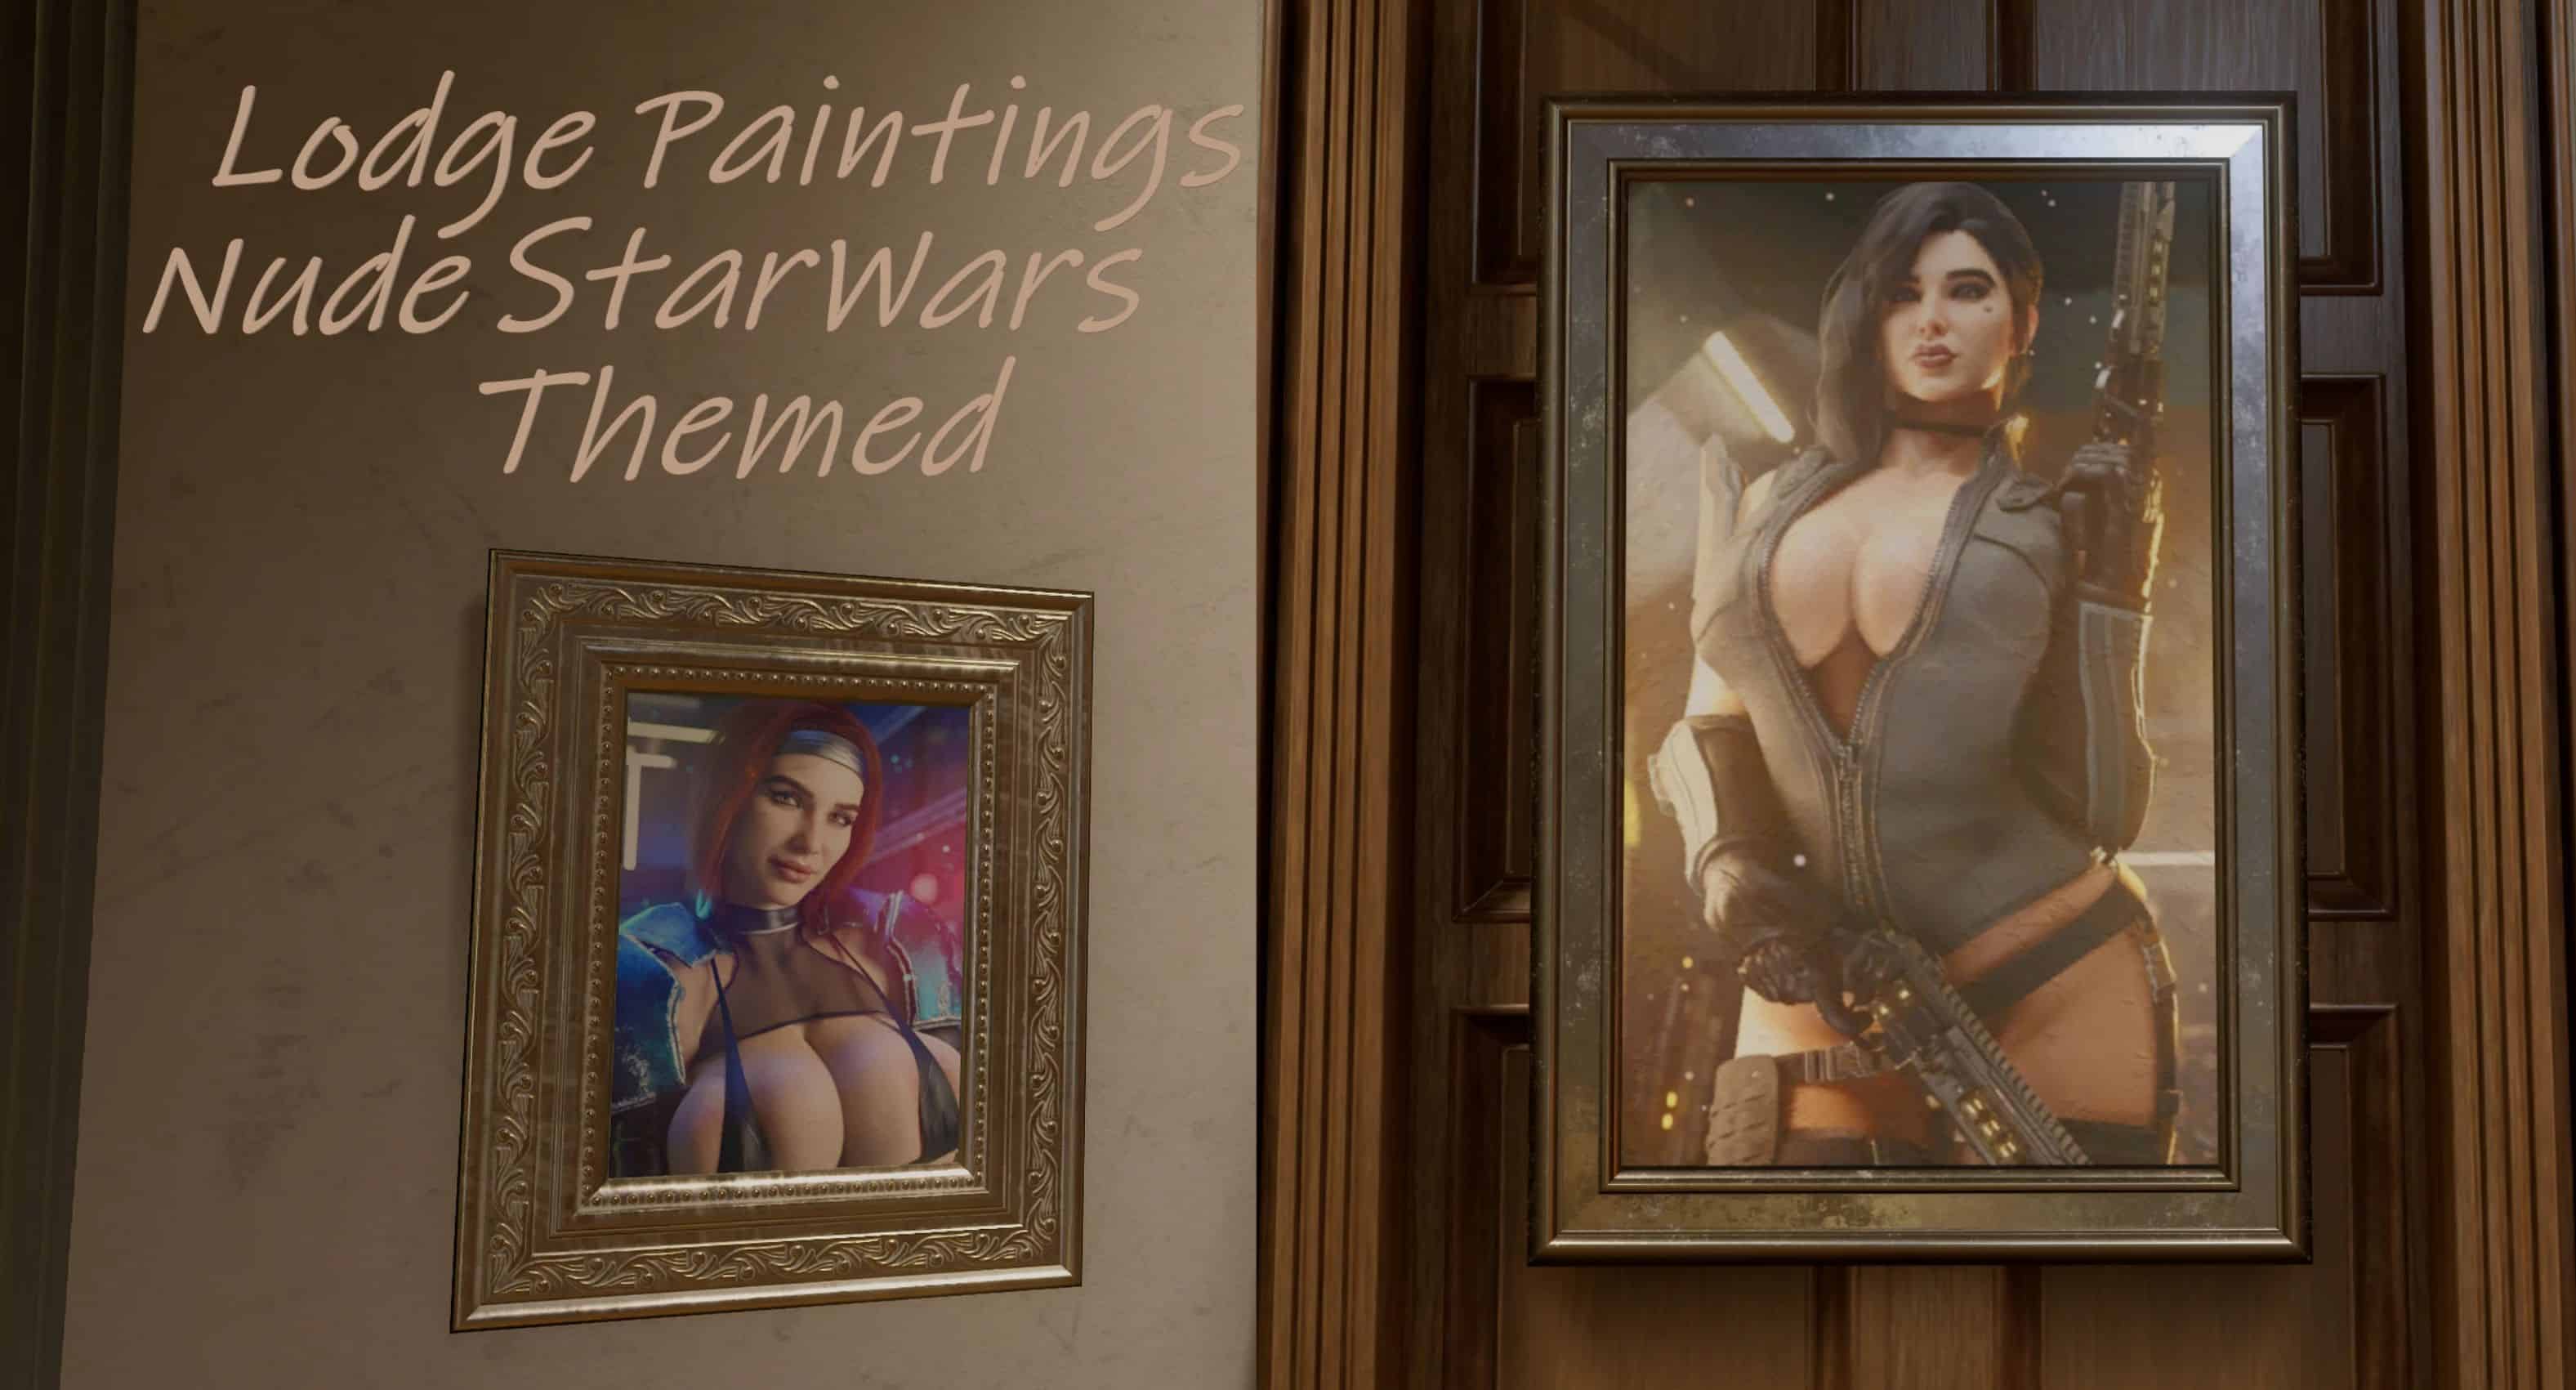 Nude Paintings for The Lodge Mostly Star Wars Themed